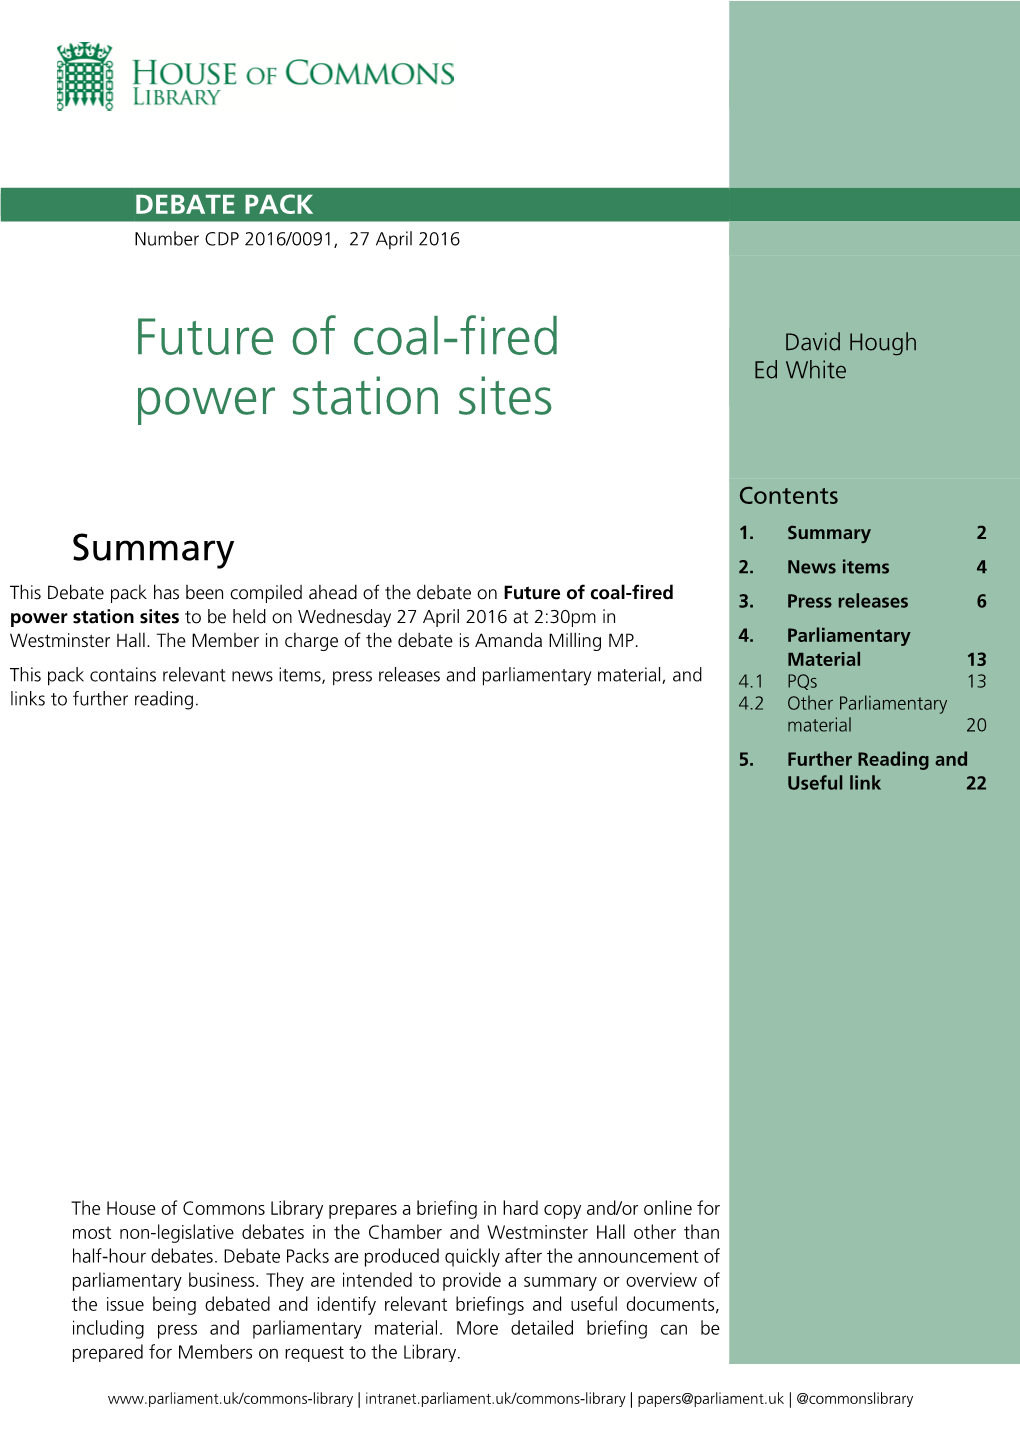 Future of Coal-Fired Power Station Sites 3